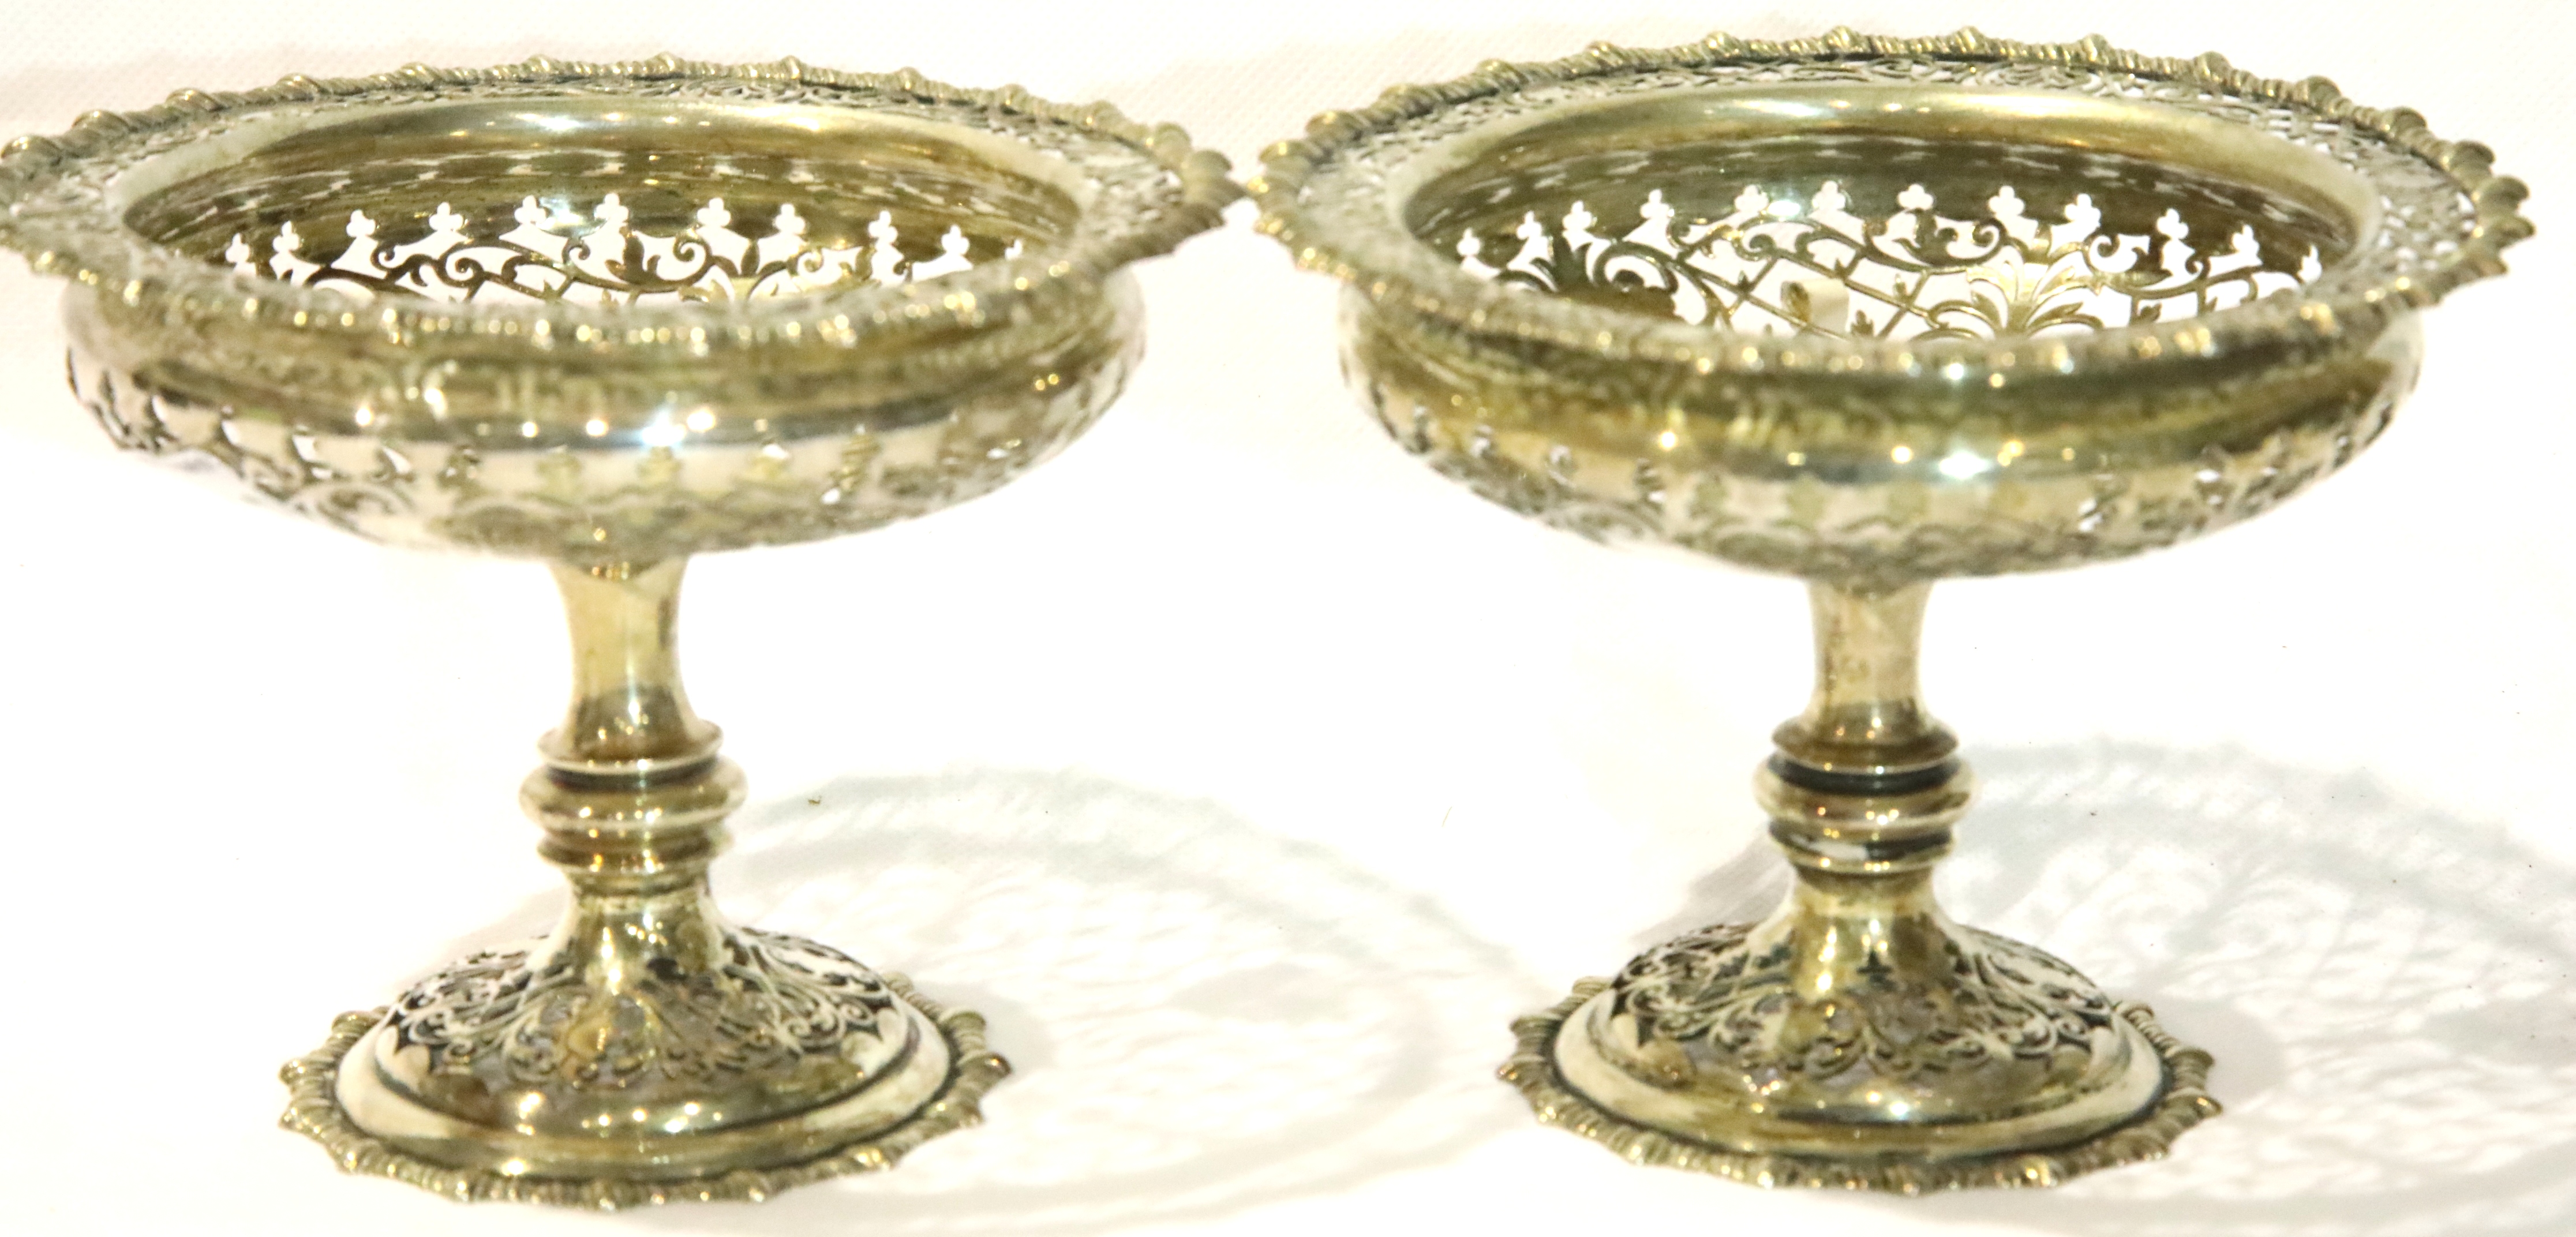 Edwardian hallmarked silver pair of pierced comports, combined 386g. P&P Group 1 (£14+VAT for the